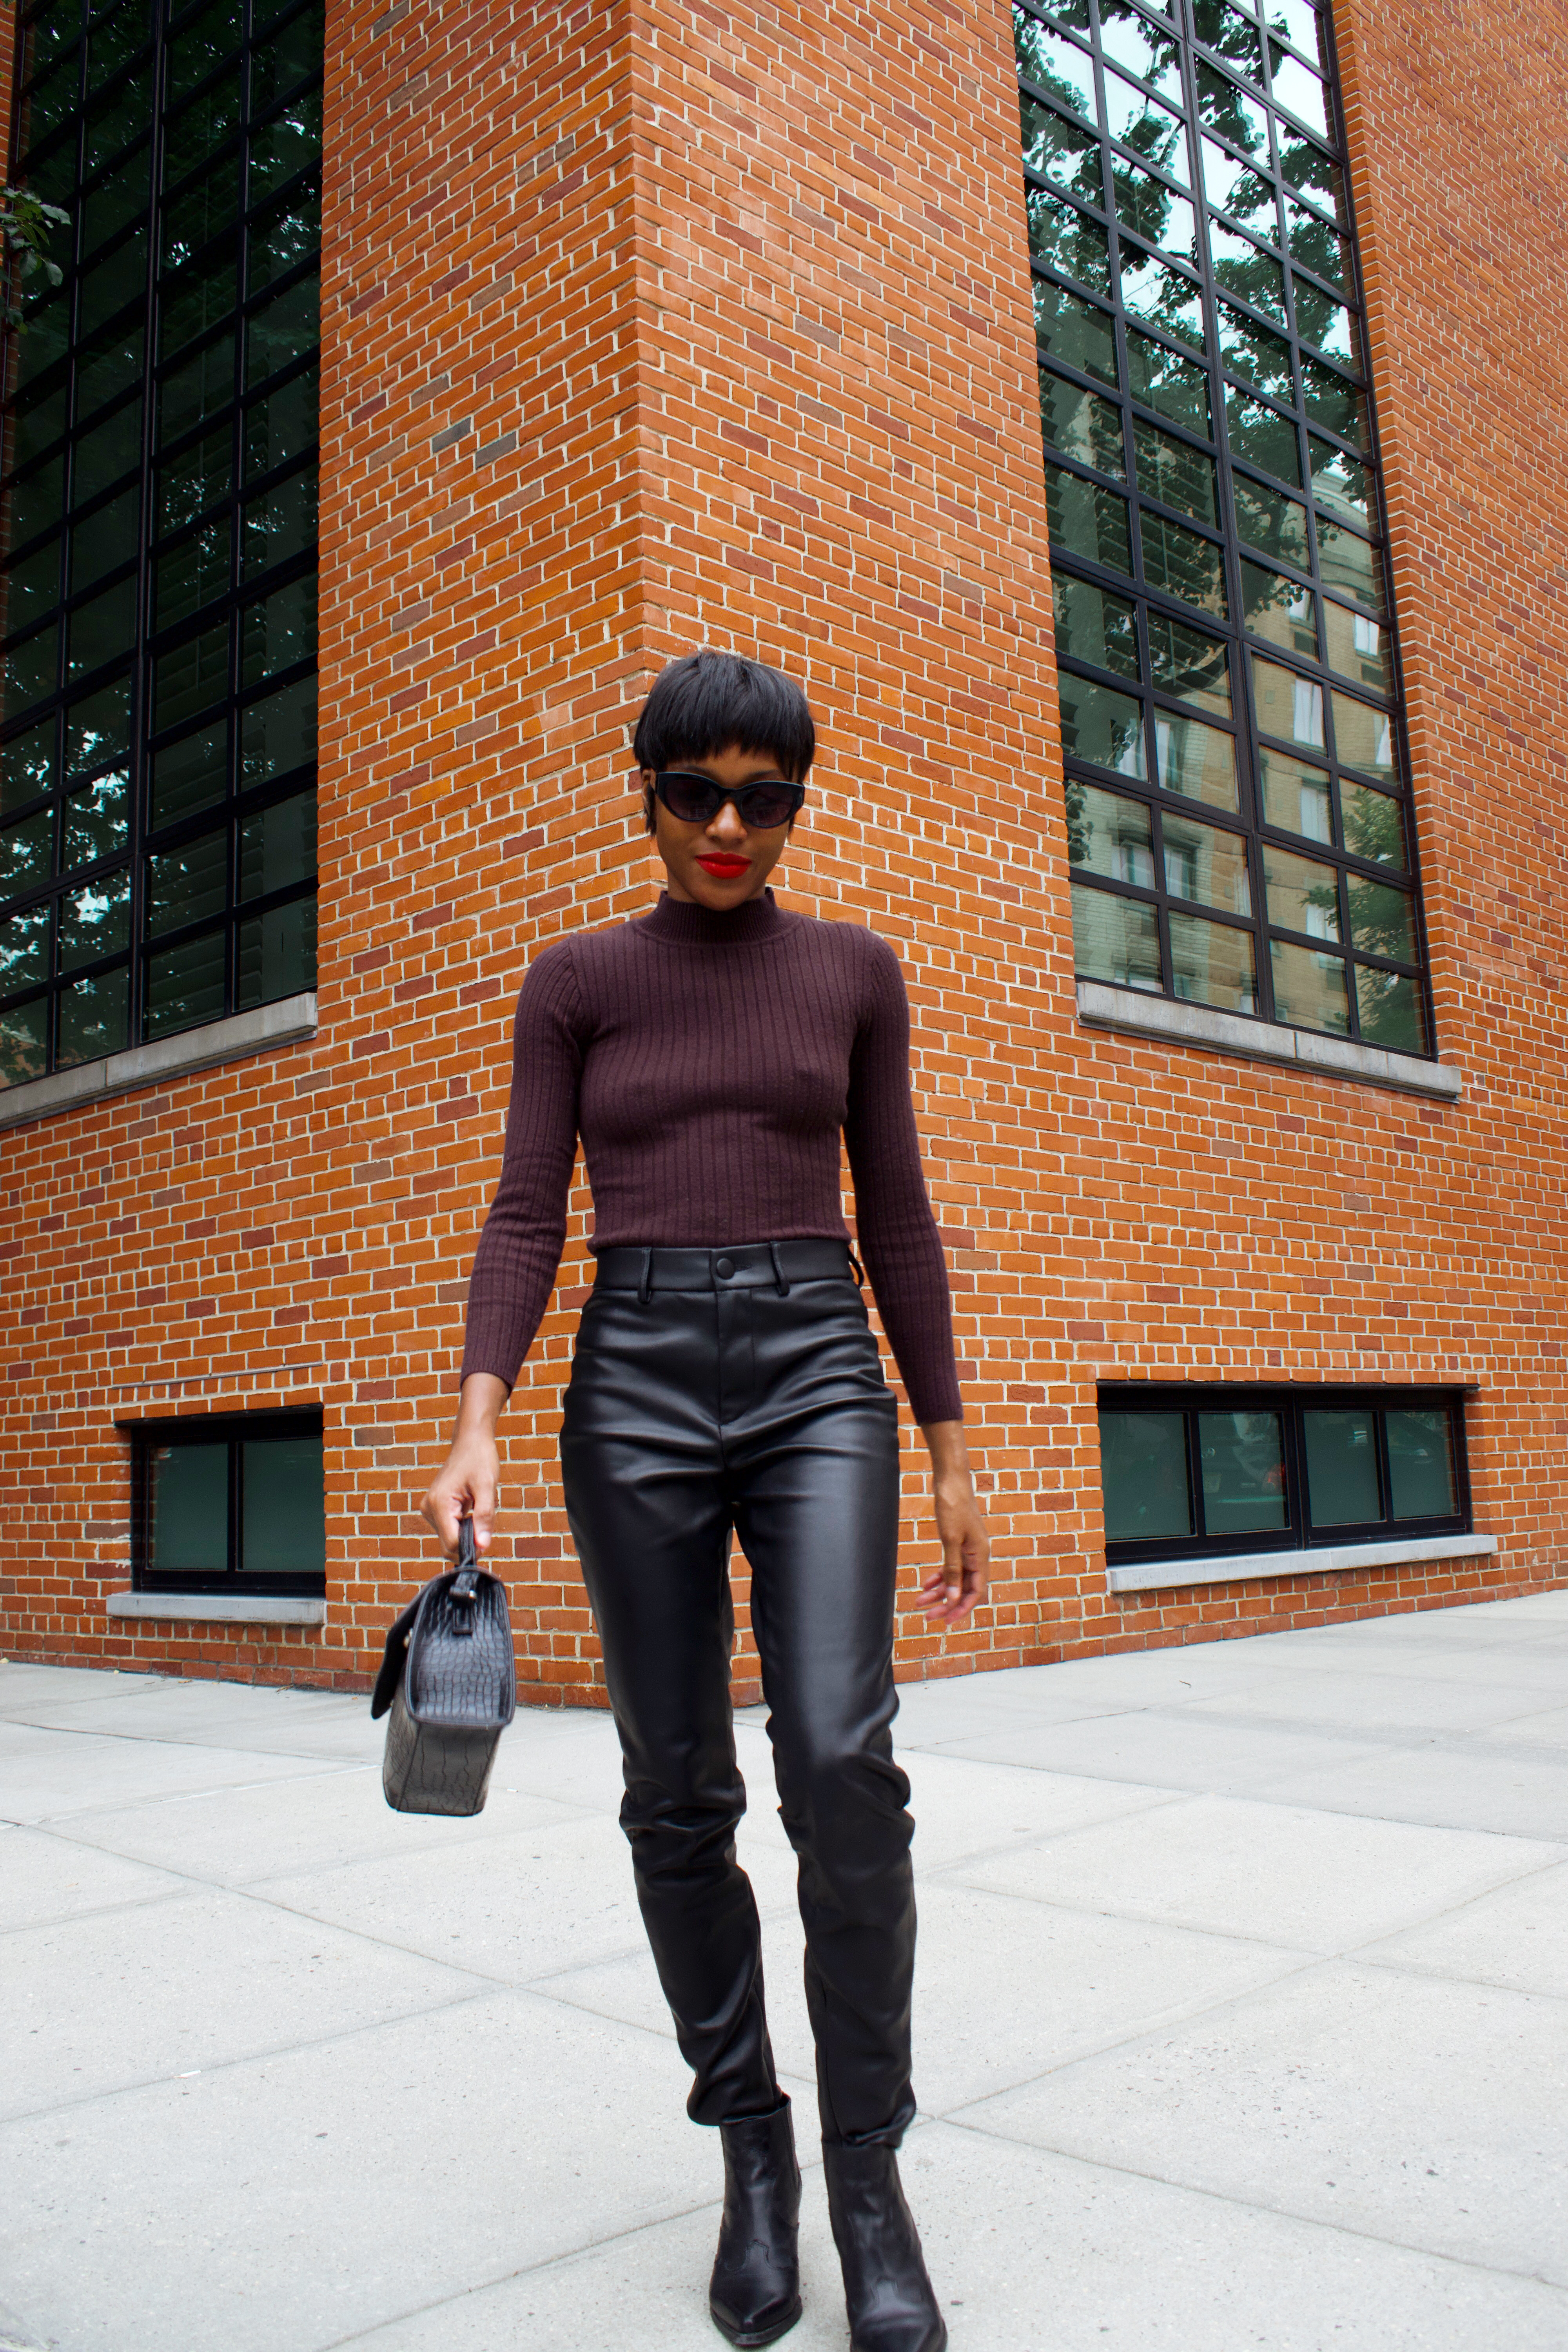 Fashion Blogger Kamara Williams shares her must-have fall essentials for 2020